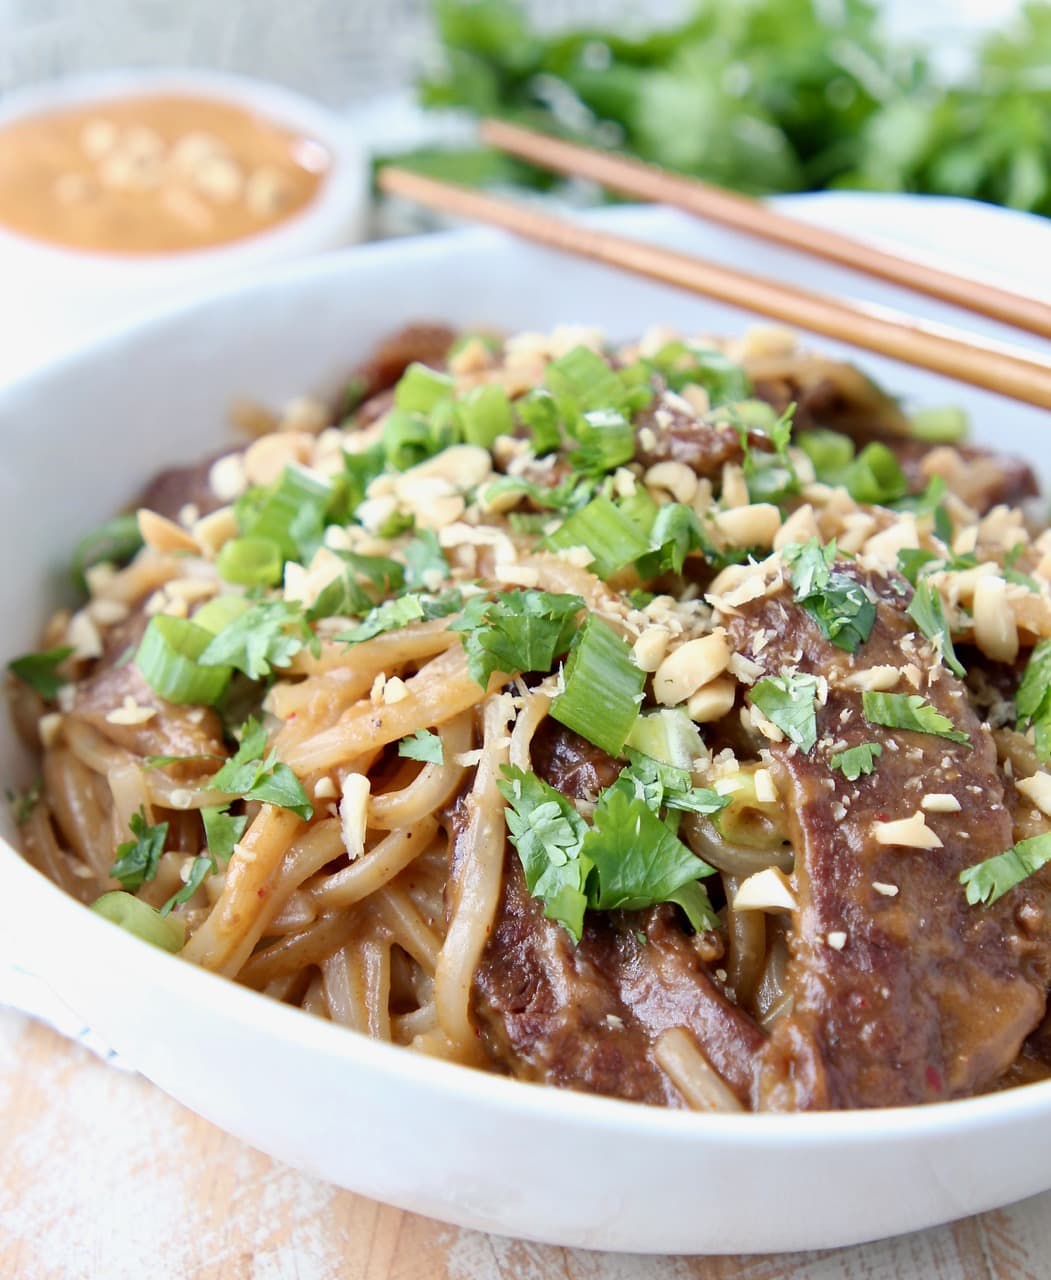 Sliced beef, noodles and sliced green onions in bowl with chopsticks on the side